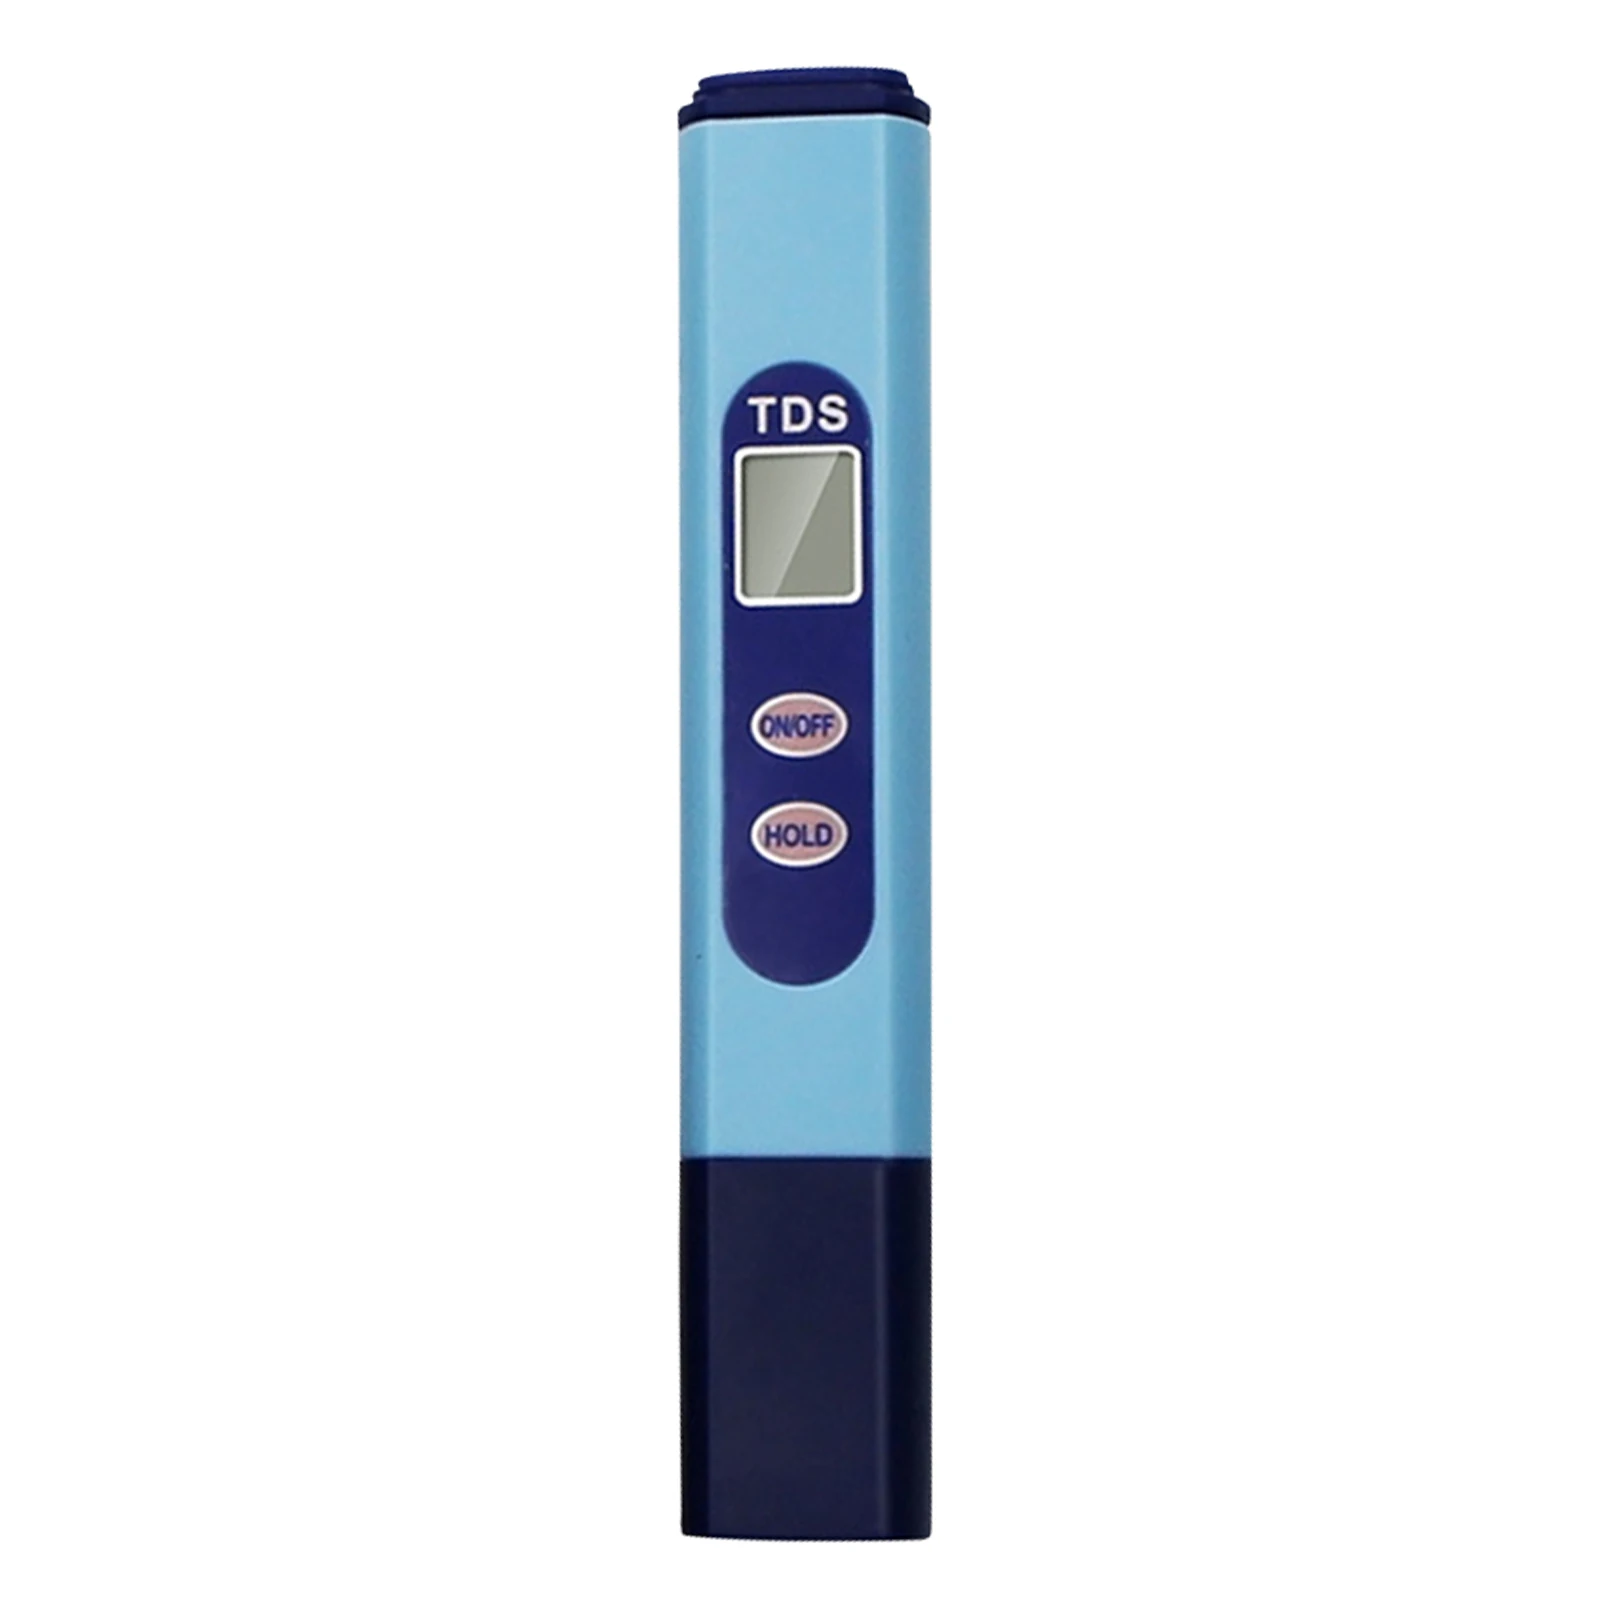 

Digital TDS Meter 0-9990PPM Accurate Water Quality Monitor Analyzer tester for Drinking Water Aquarium Swimming Pool Aquiculture